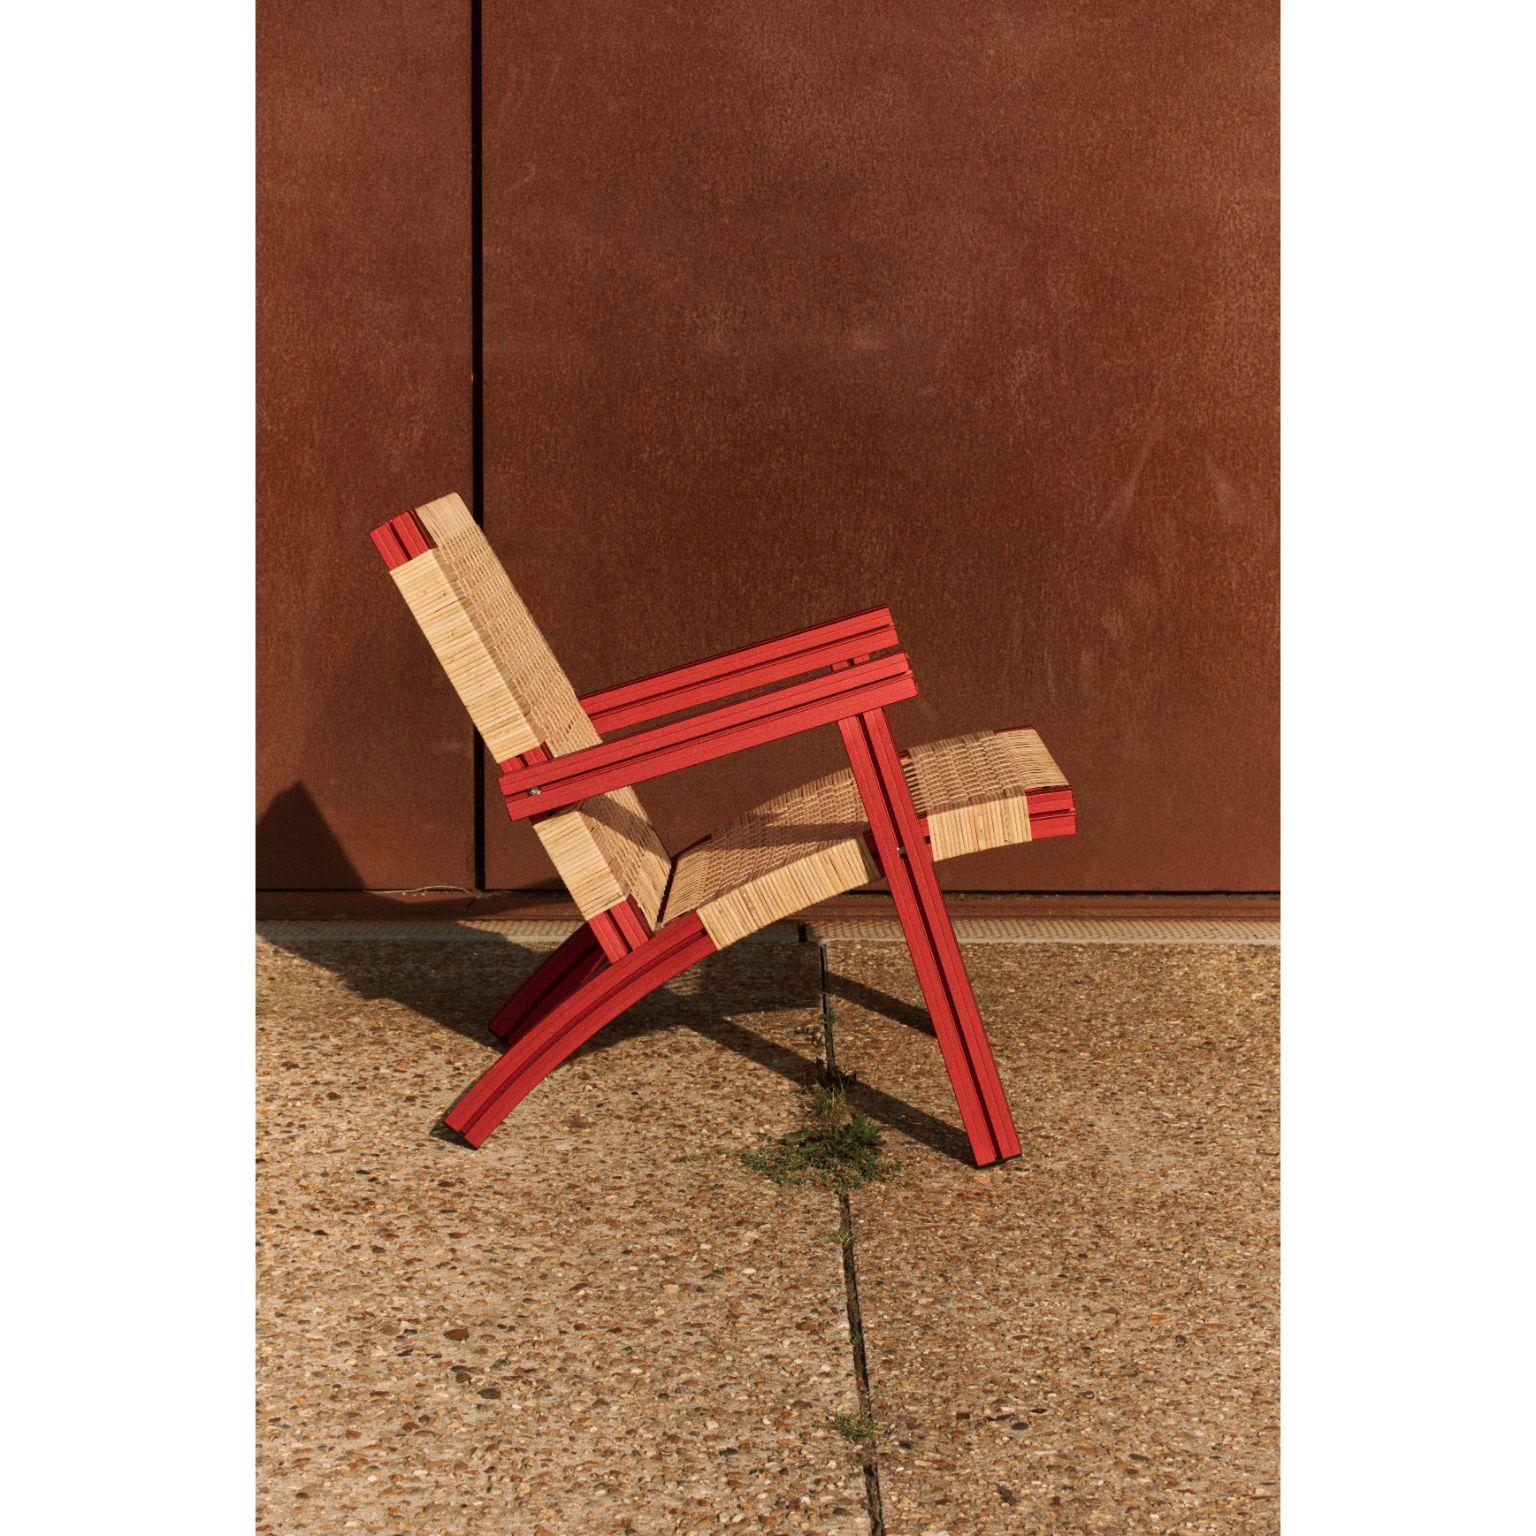 Anodised burgundy and cane wicker armchair by Tino Seubert.
Dimensions: D 73 x W 72 x H 74 cm.
Materials: Color anodized aluminum extrusions, cane weave.

Tino Seubert
When he first made his now signature wicker and aluminium stools and benches